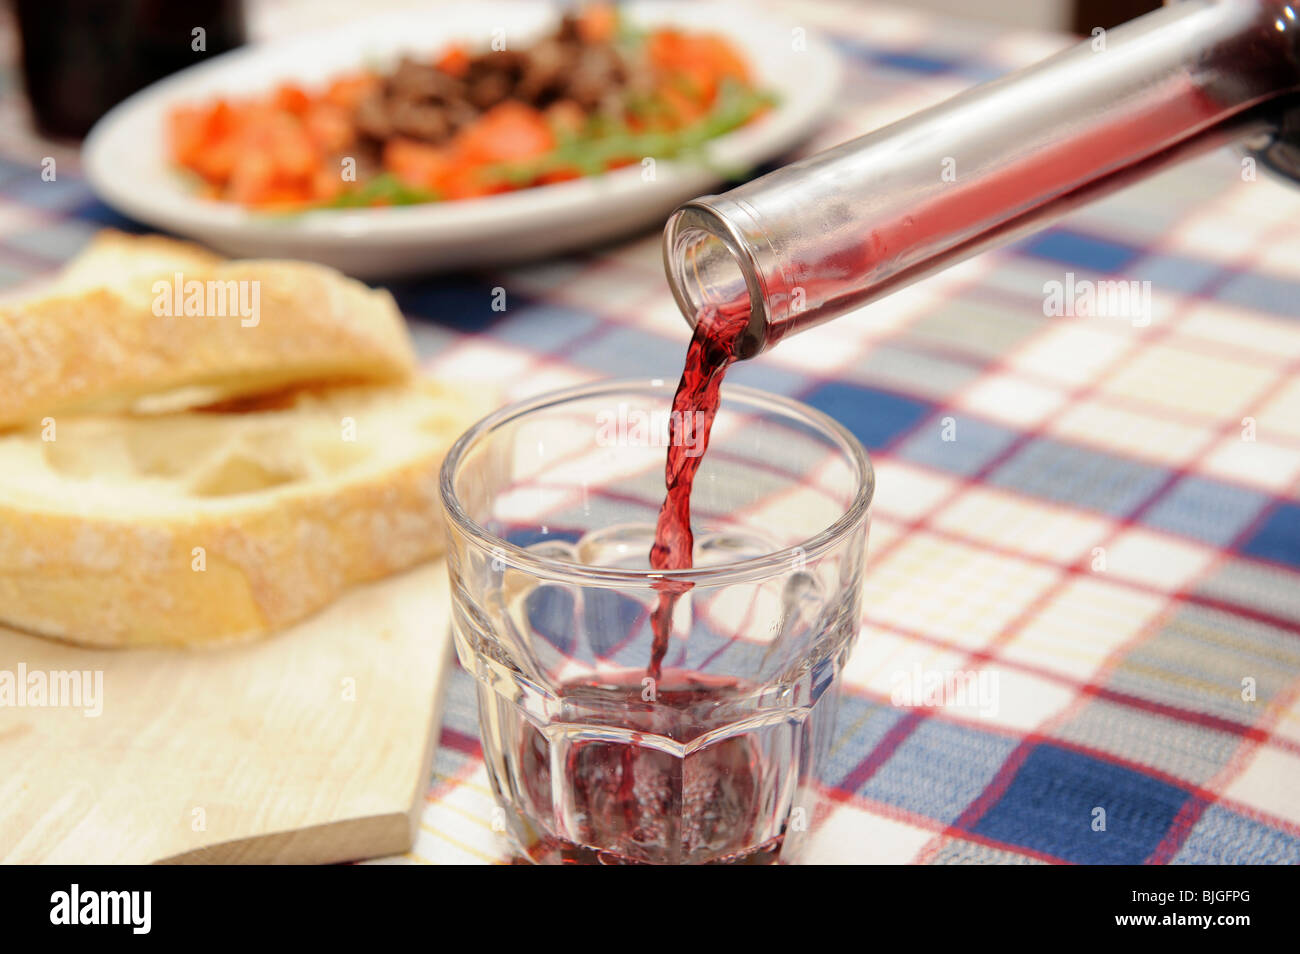 Home made italian cuisine served in a farm holidays Stock Photo